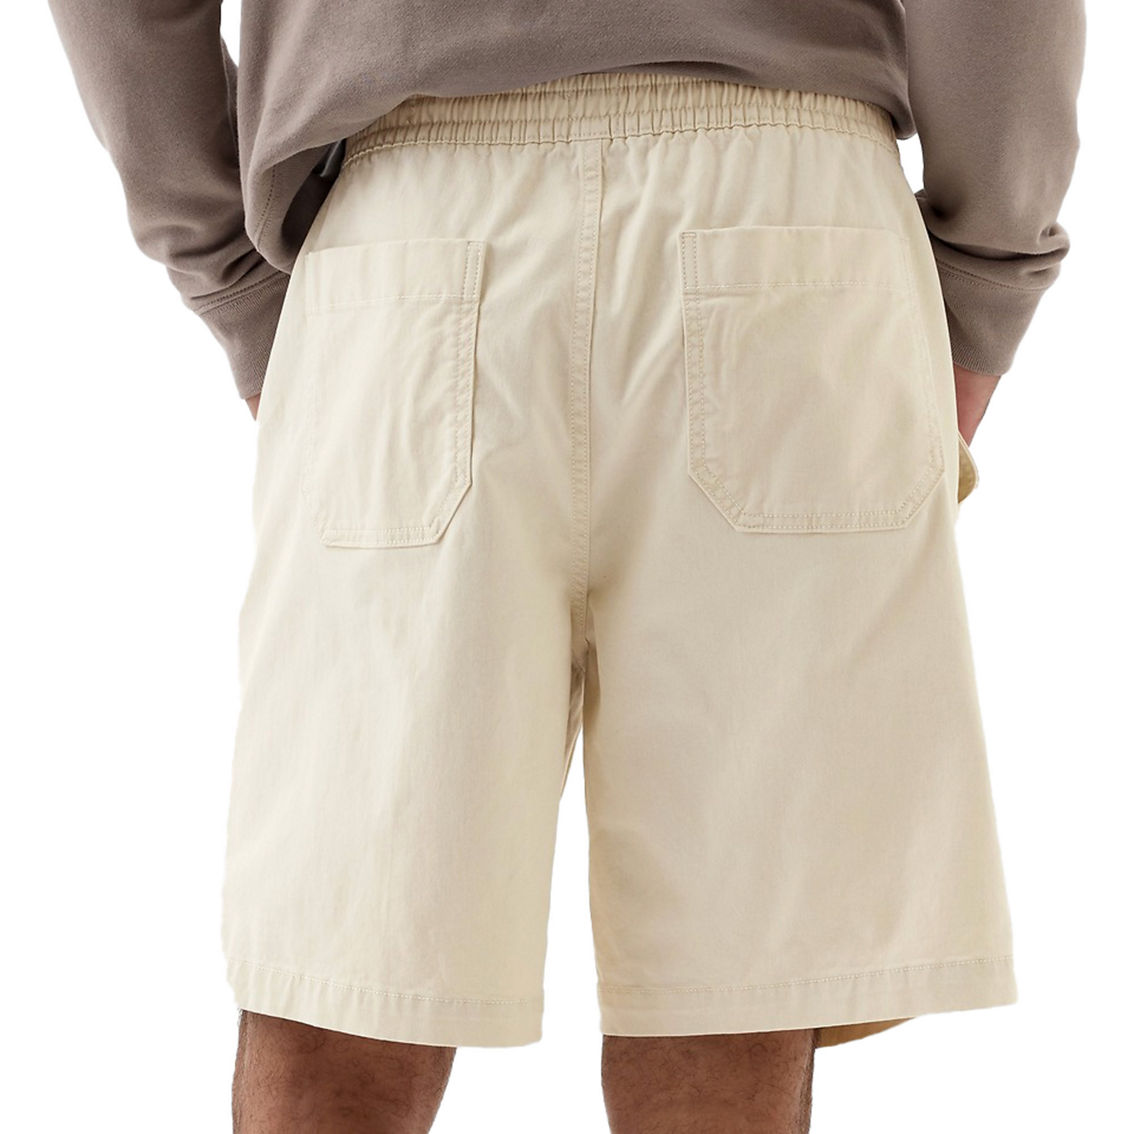 Gap 8 in. Essential Easy Shorts - Image 2 of 4